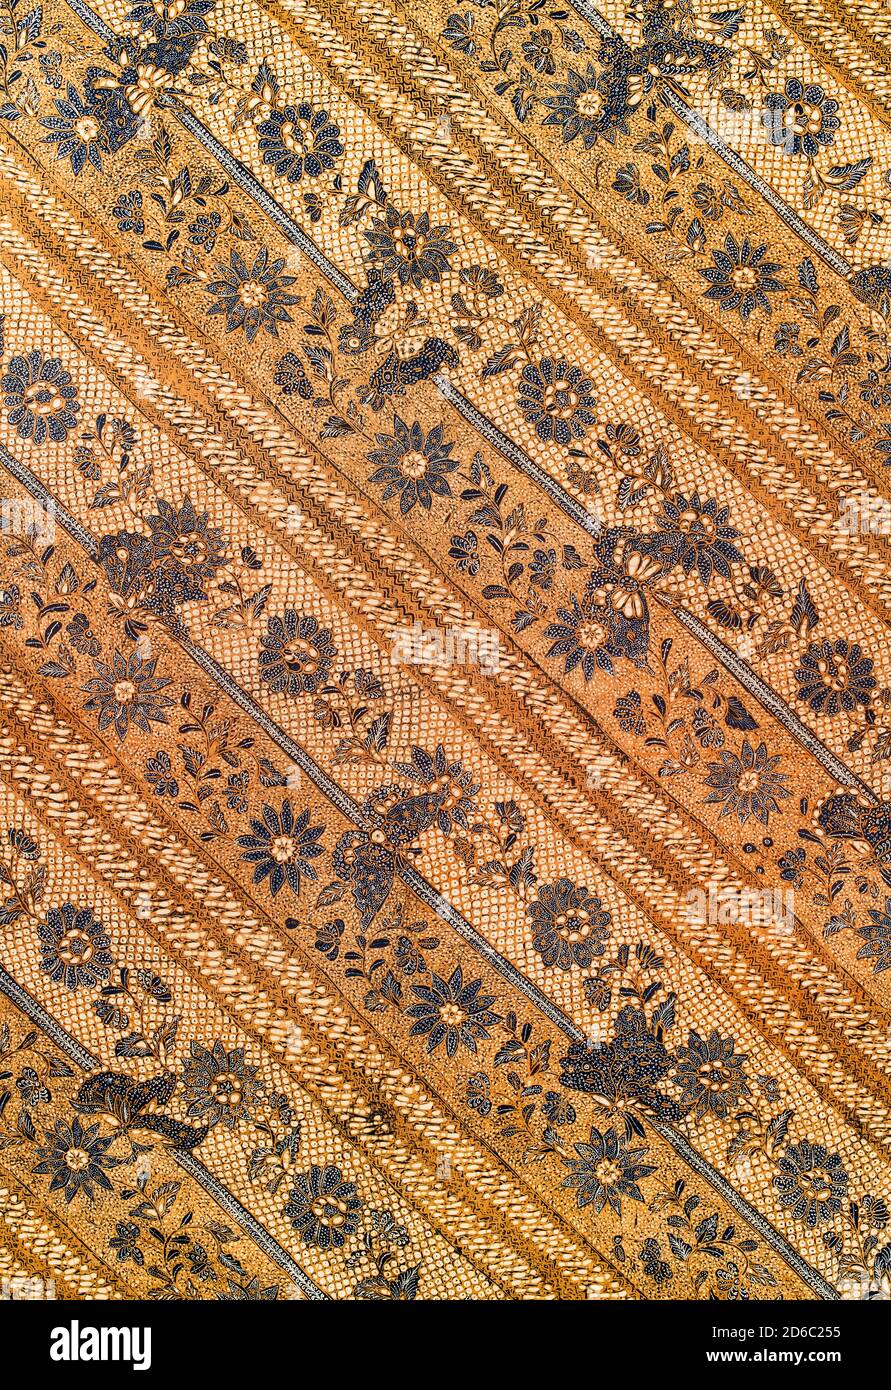 Batik Indonesian: is a technique of wax-resist dyeing applied to whole cloth, or cloth made using this technique originated from Indonesia. Stock Photo